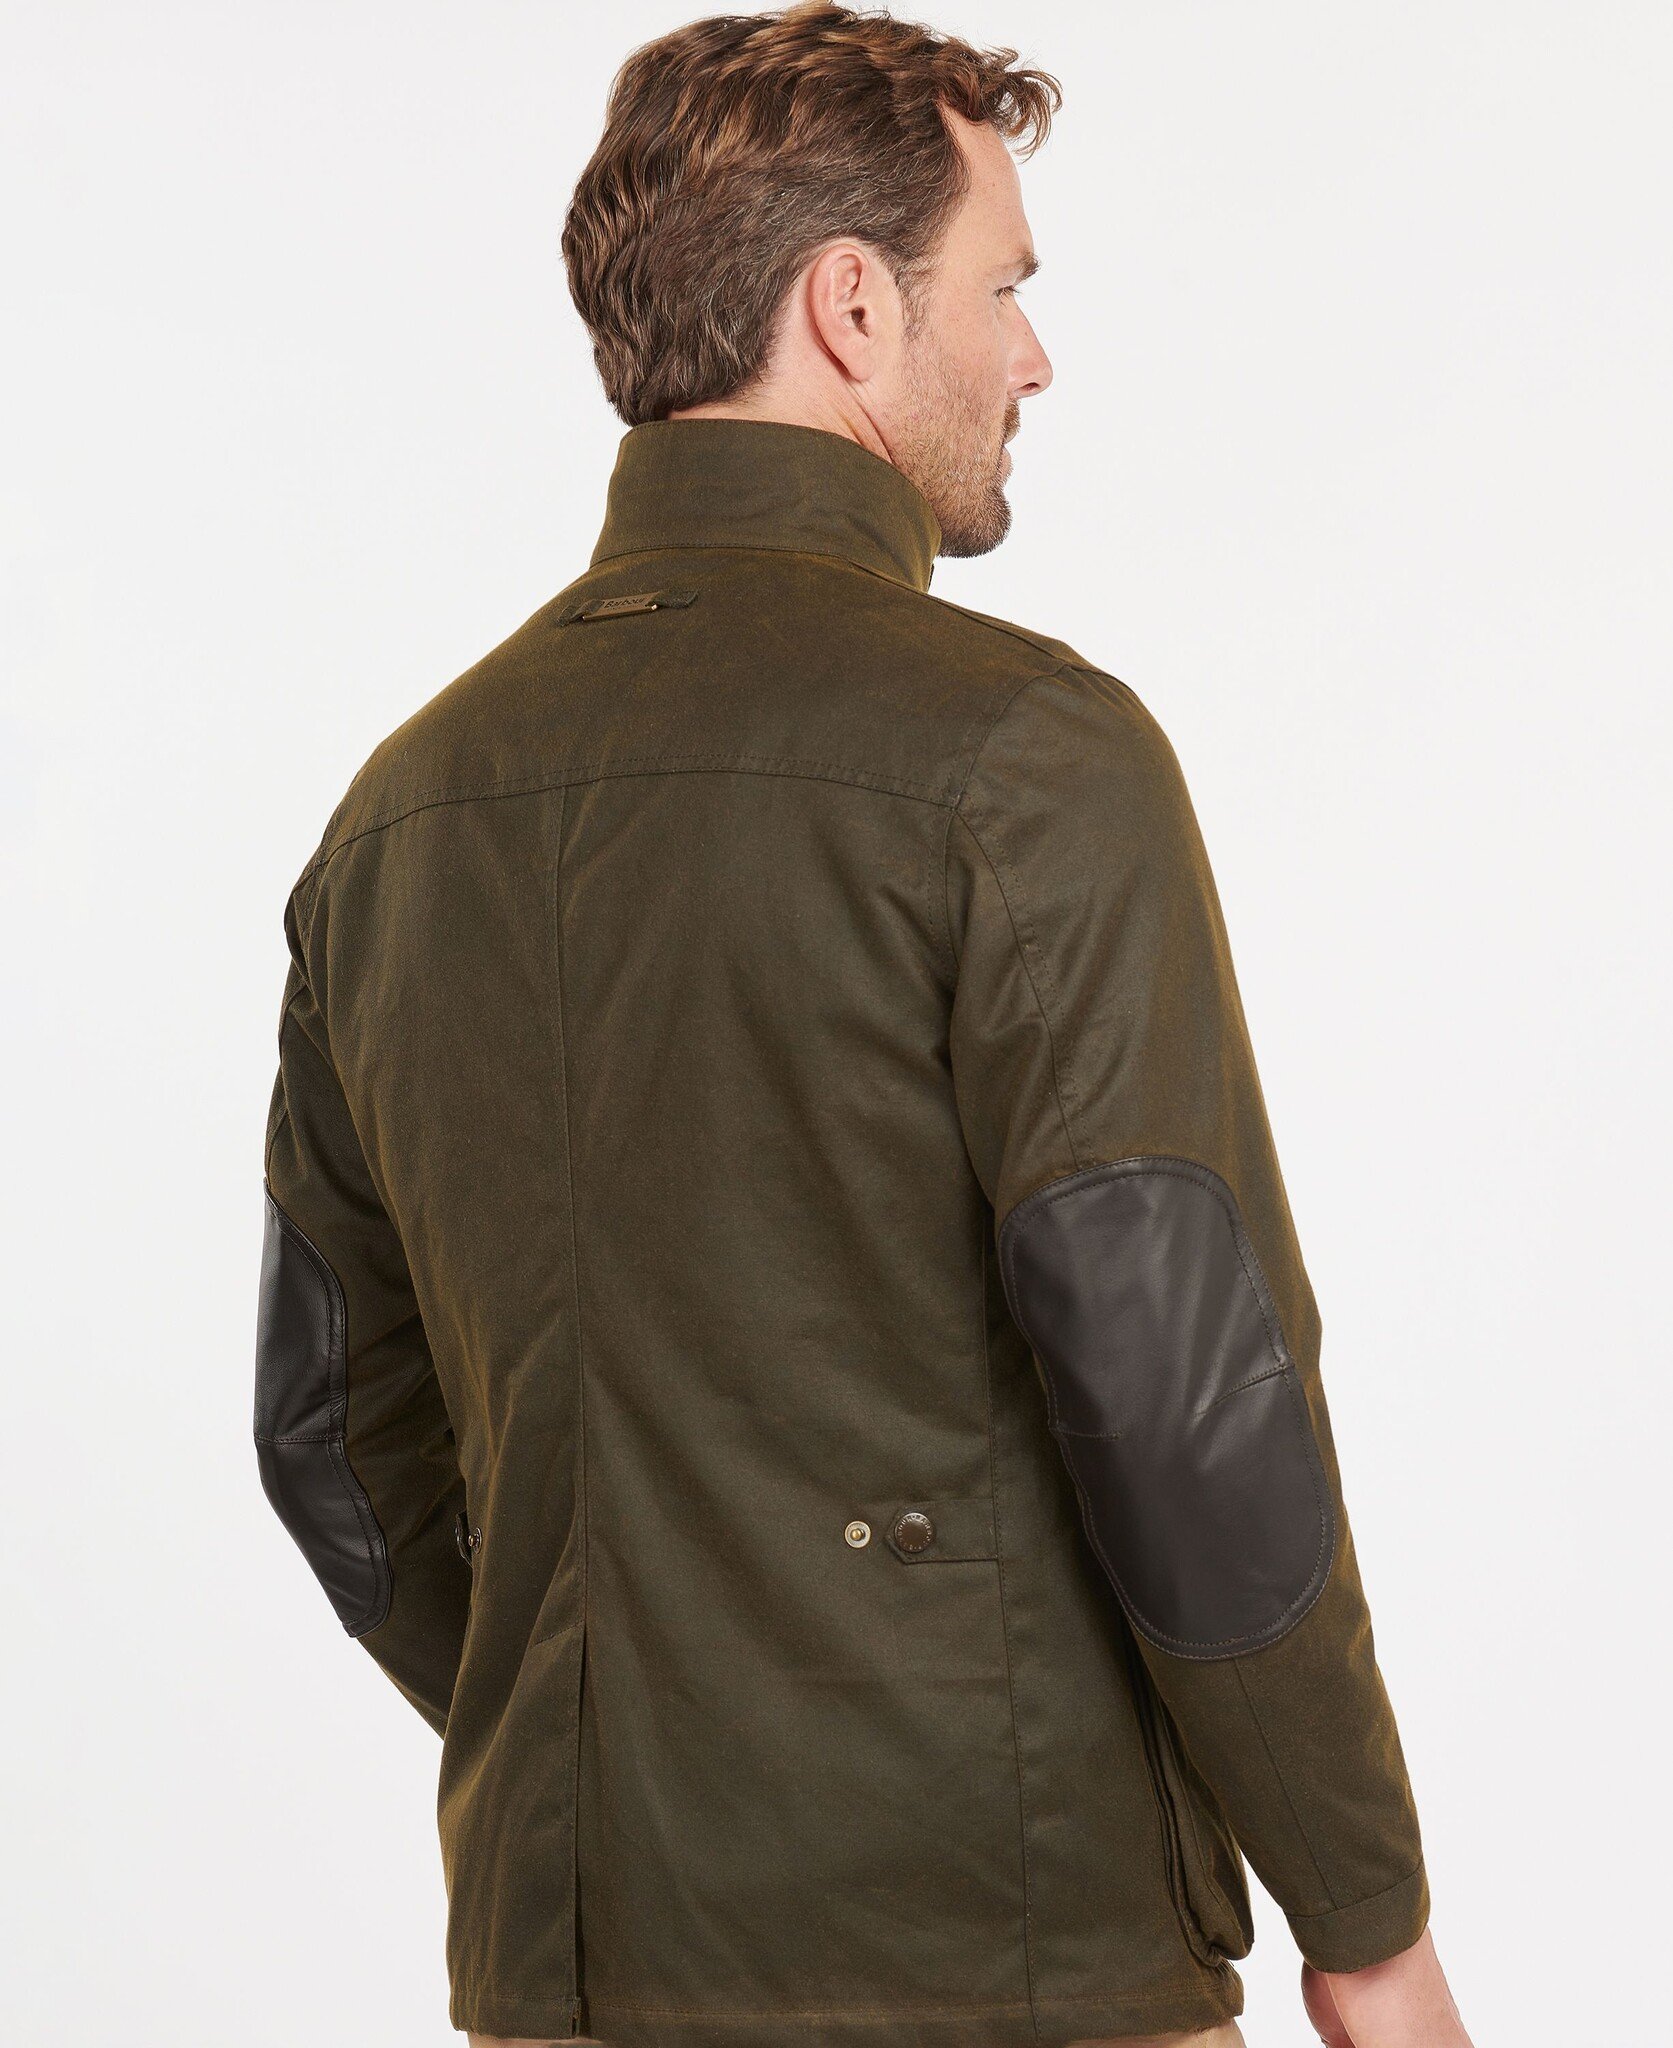 Barbour　Ogston Waxed Jacket　69240319-01S身幅約58cm